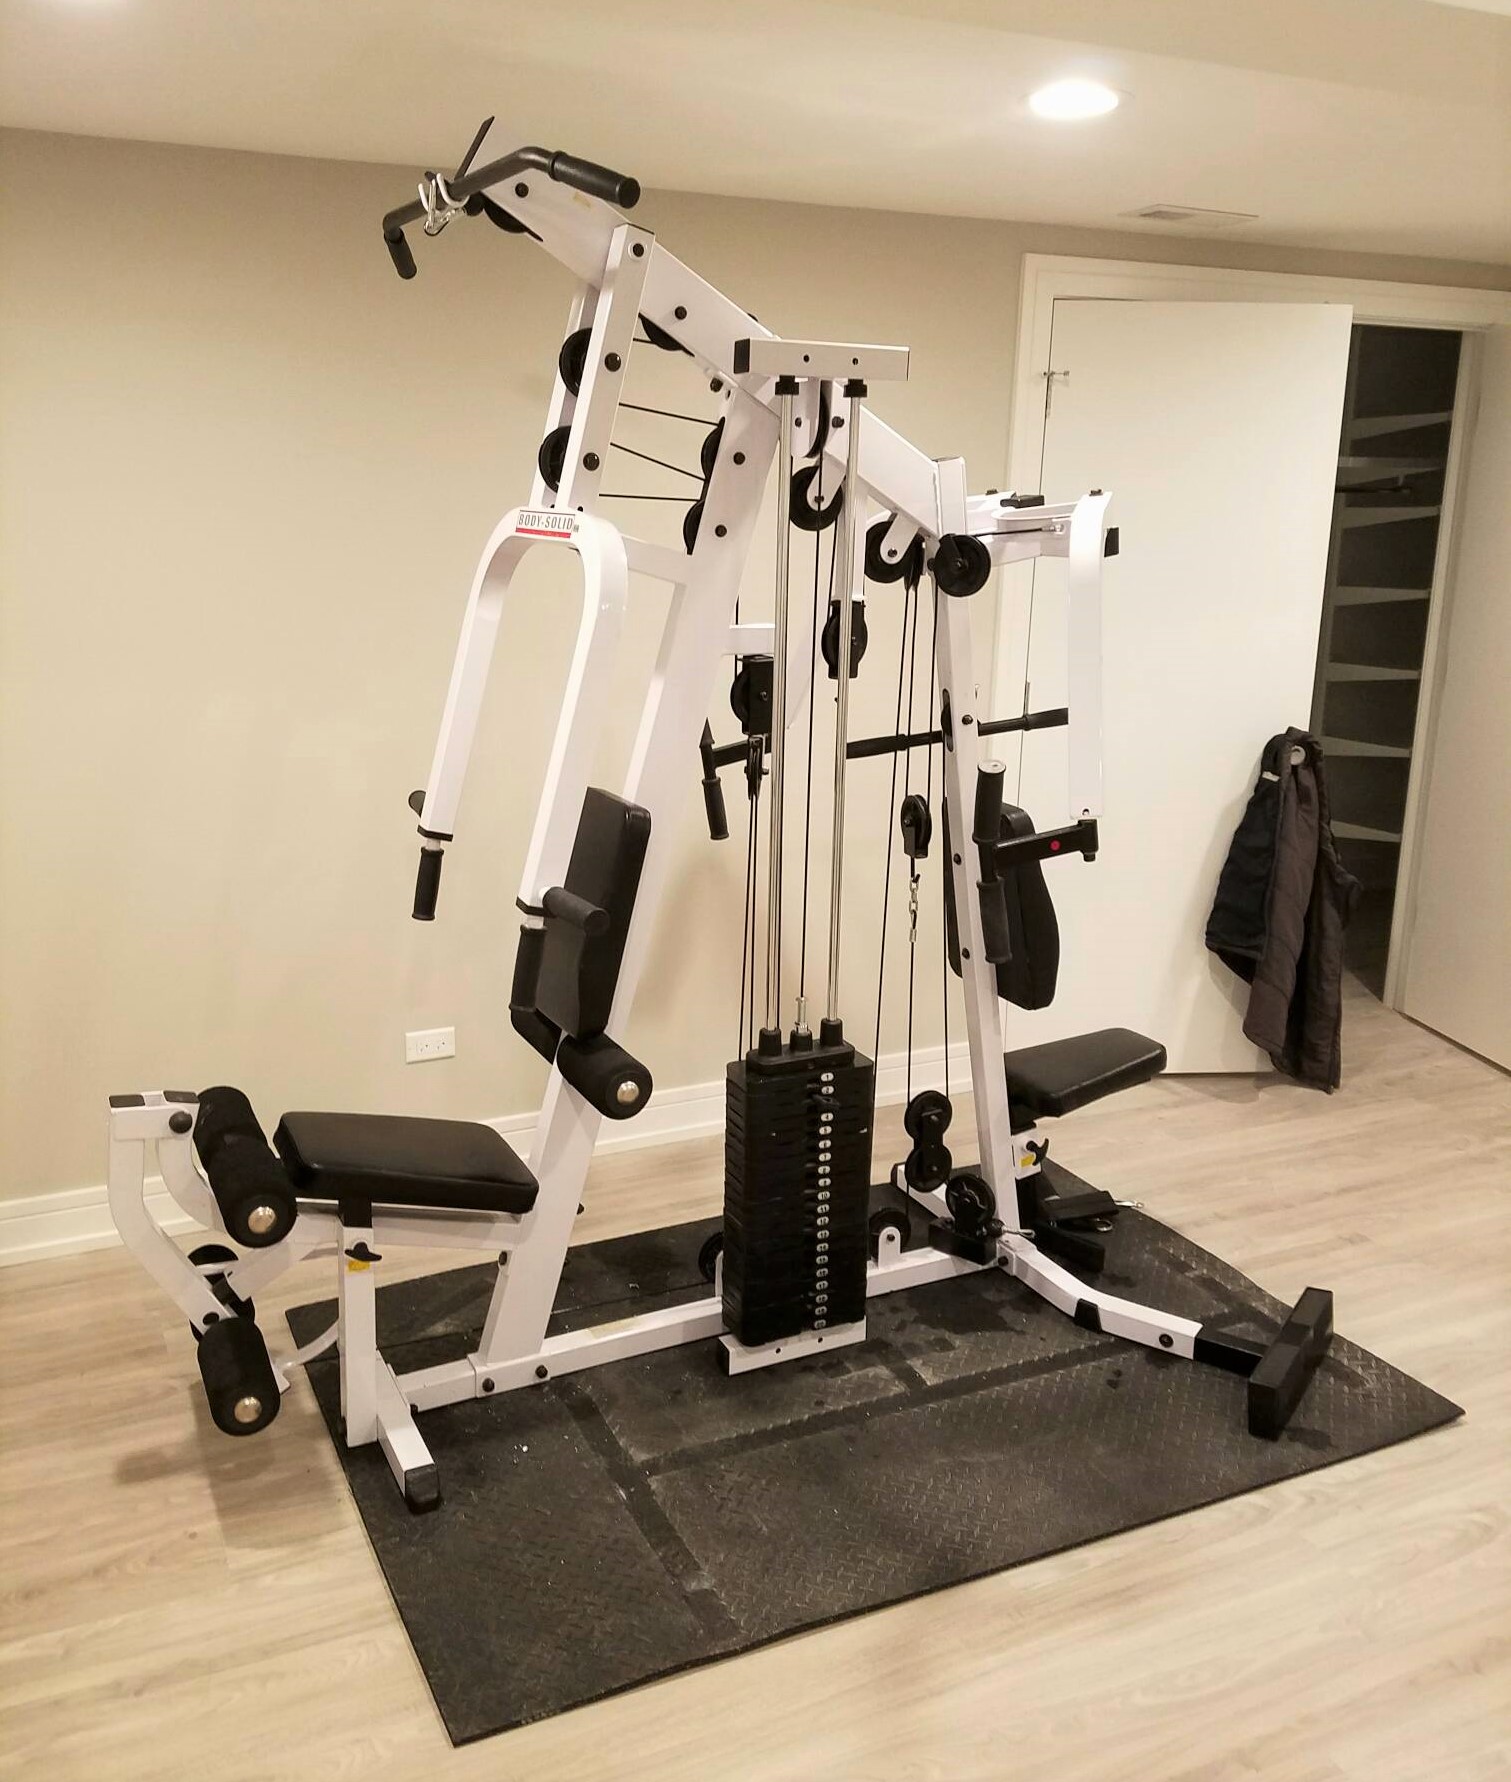 Transmotion Delivery Assembly Installation Relocation Extraction Removal Chicago IL Washington California Michigan Indiana Near me Local Fitness Fitness Equipment Patio Furniture Game Tables True Fitness Performance 300 Treadmill Body-solid EXM2500 S Home Gym